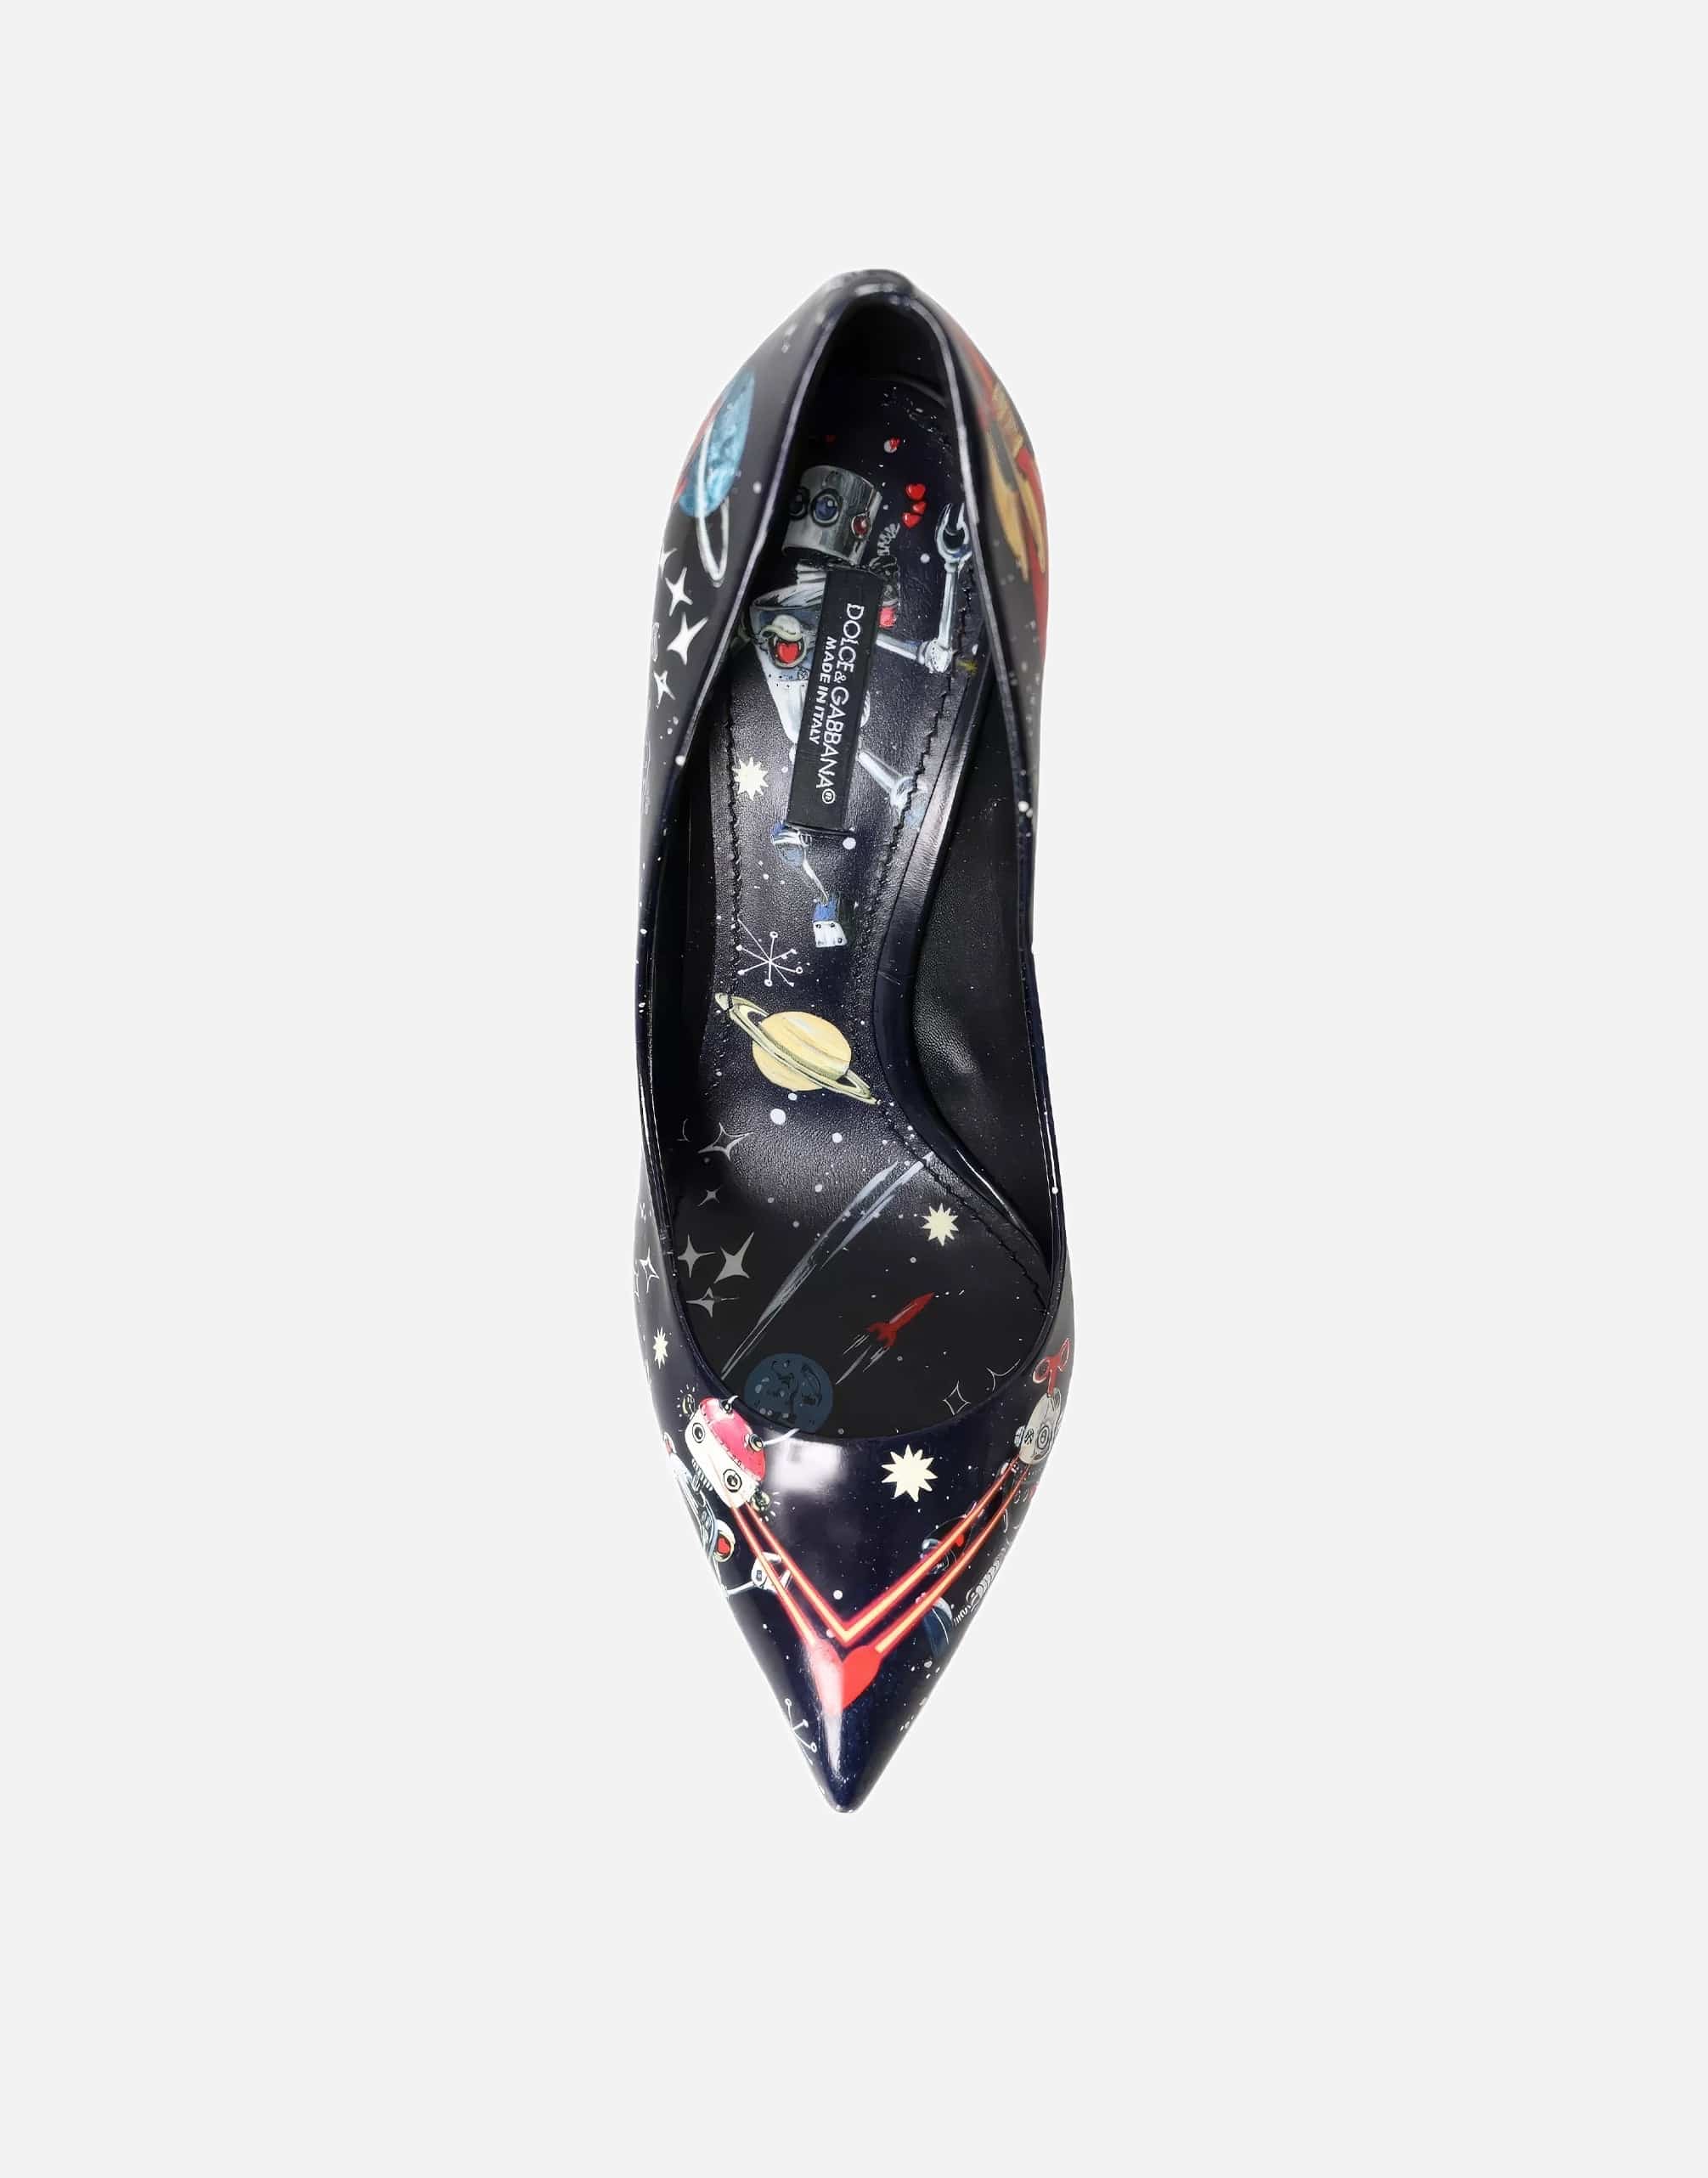 Dolce & Gabbana Pumps With Space And Robot Print